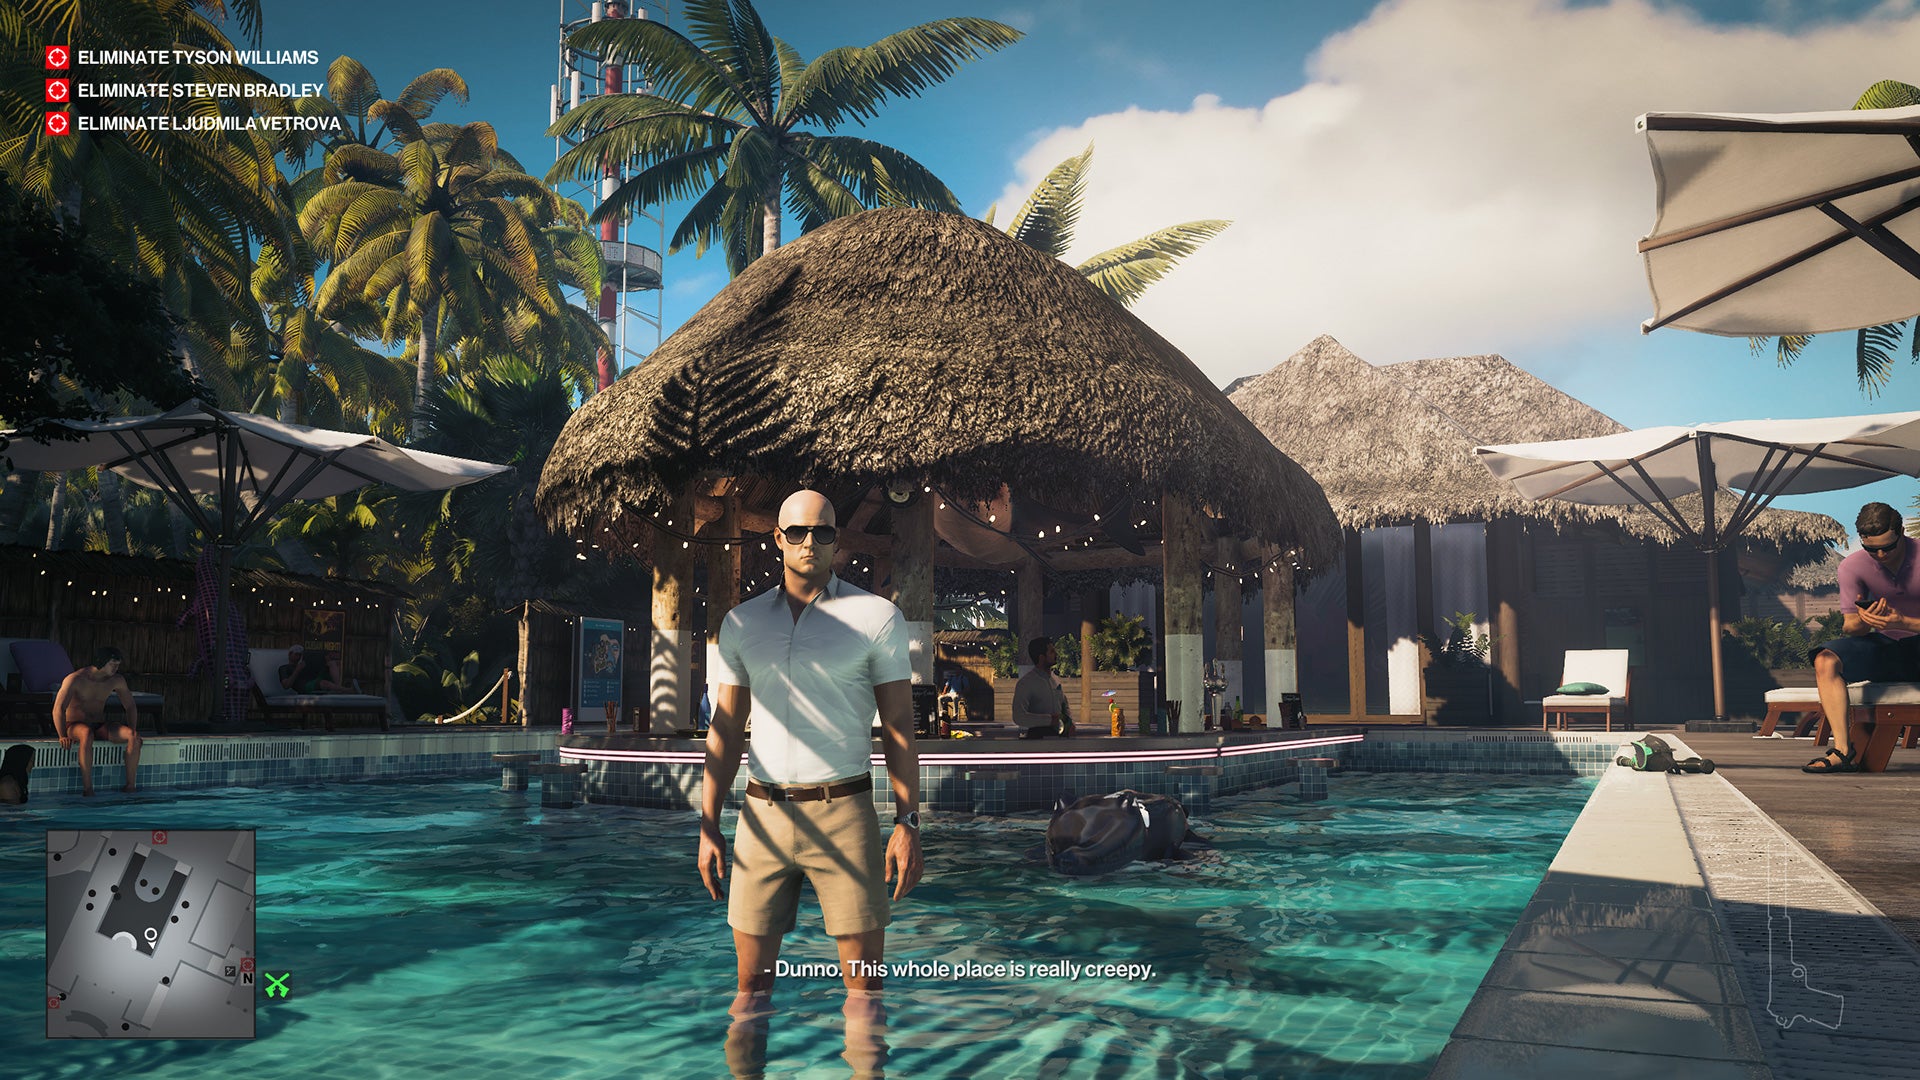 Ian Hitman stands in a pool in front of a swanky pool bar. He's wearing shorts and a white shirt, and looks like he might be on a normal holiday, almost.